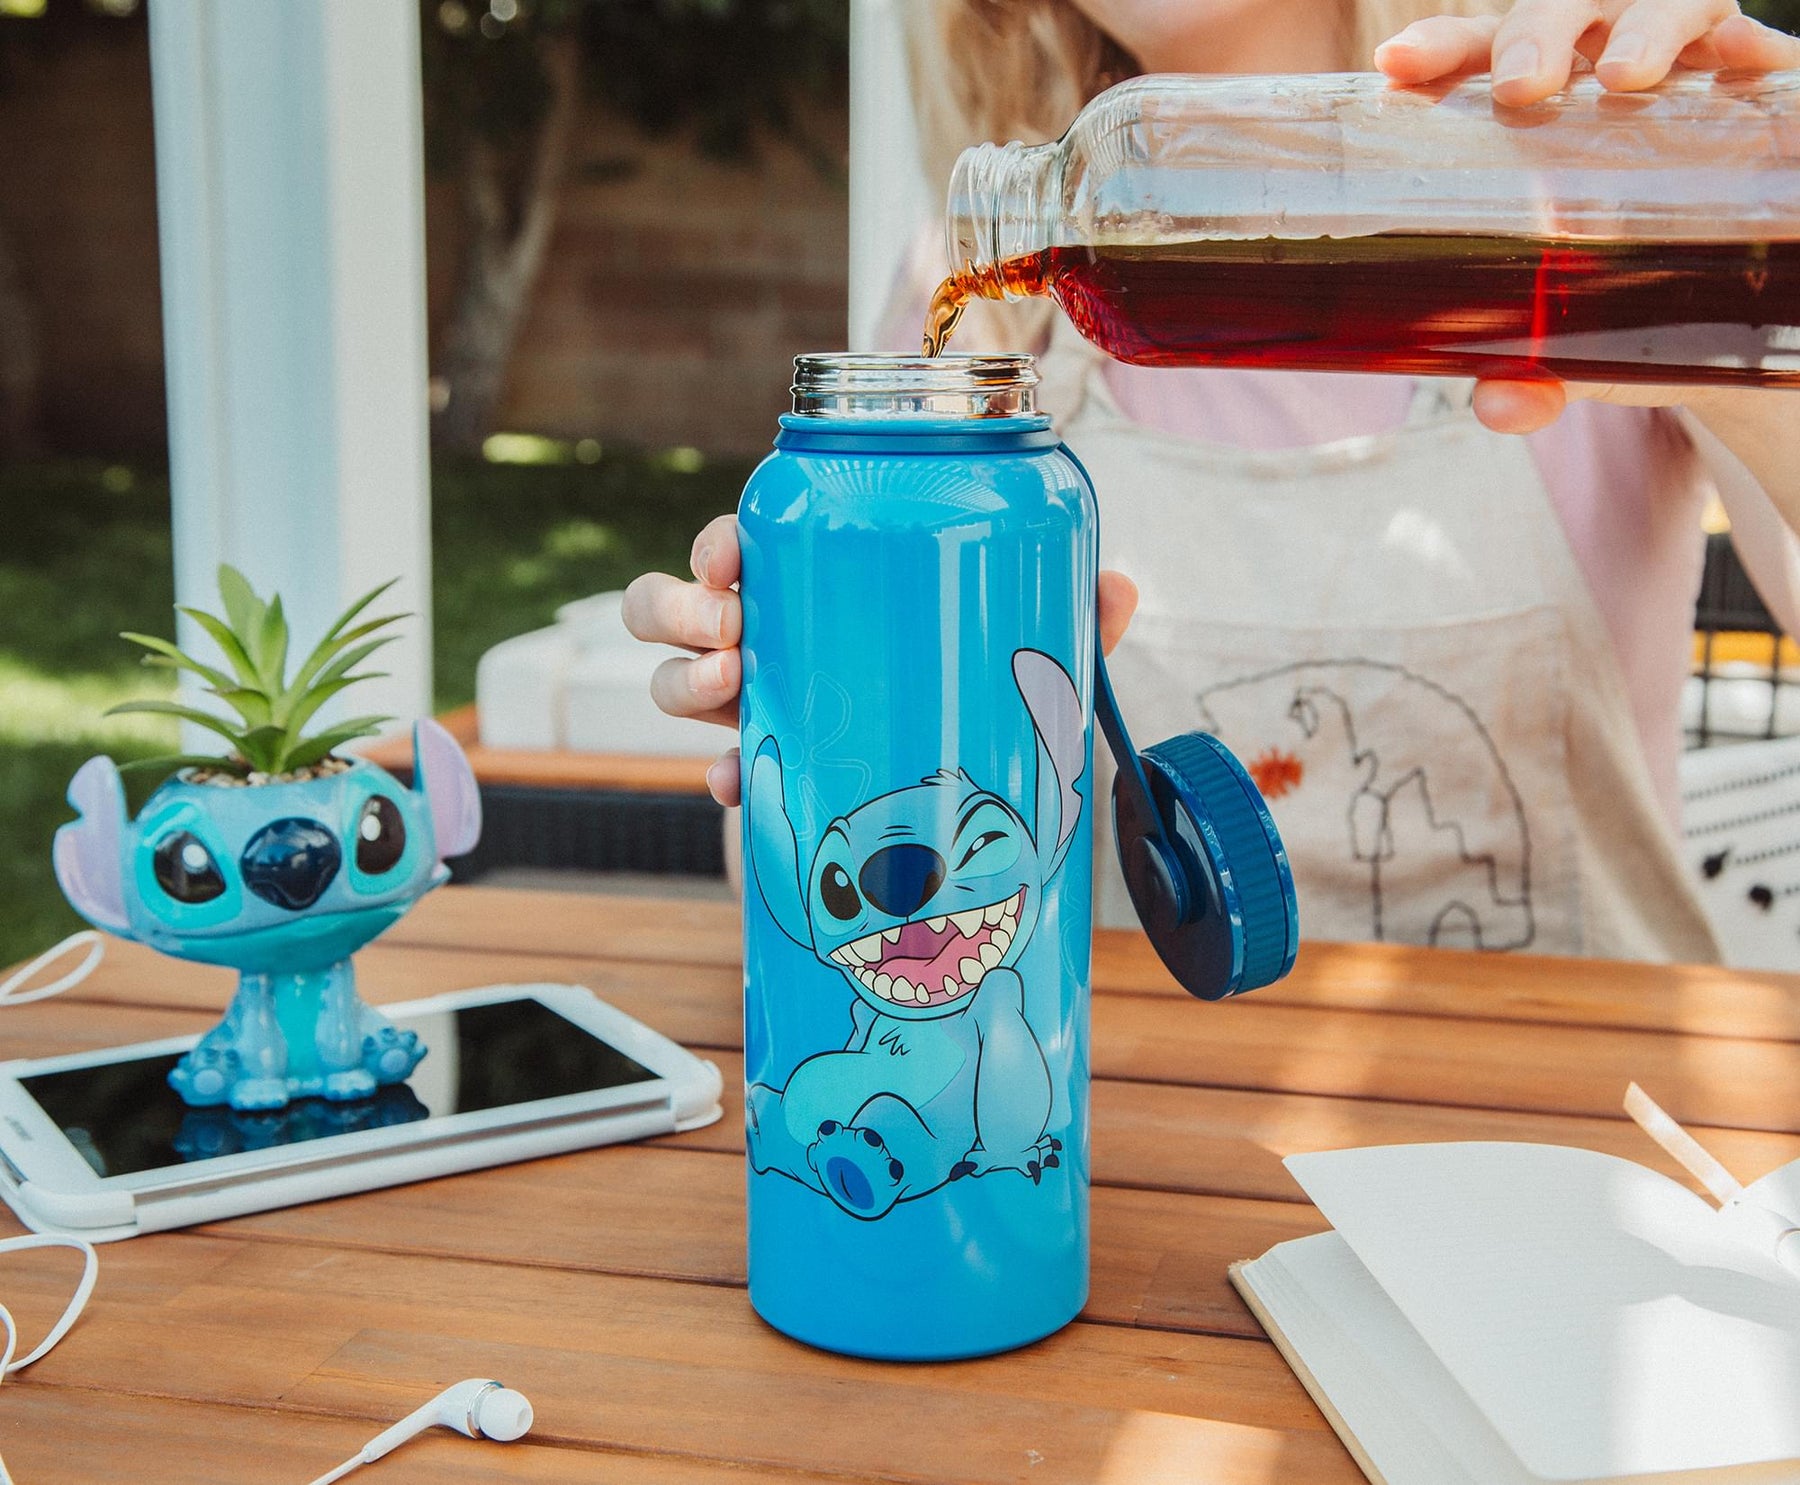 Disney Lilo & Stitch "Ohana Means Family" 42-Ounce Stainless Steel Water Bottle